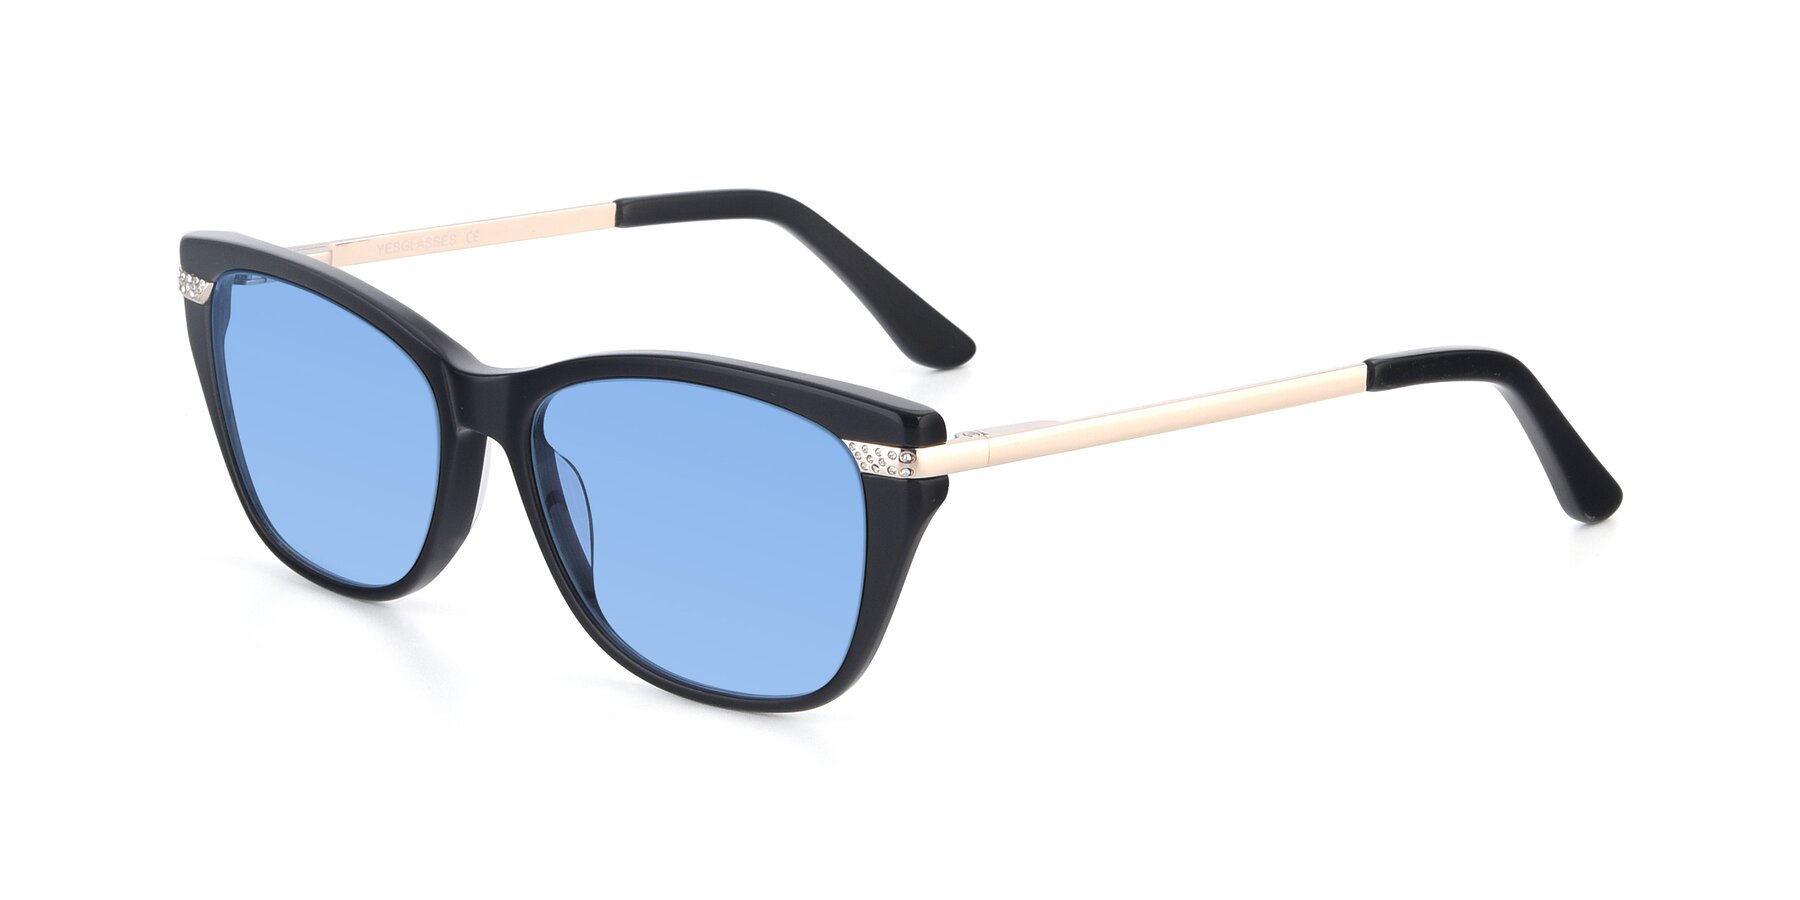 Angle of 17515 in Black with Medium Blue Tinted Lenses